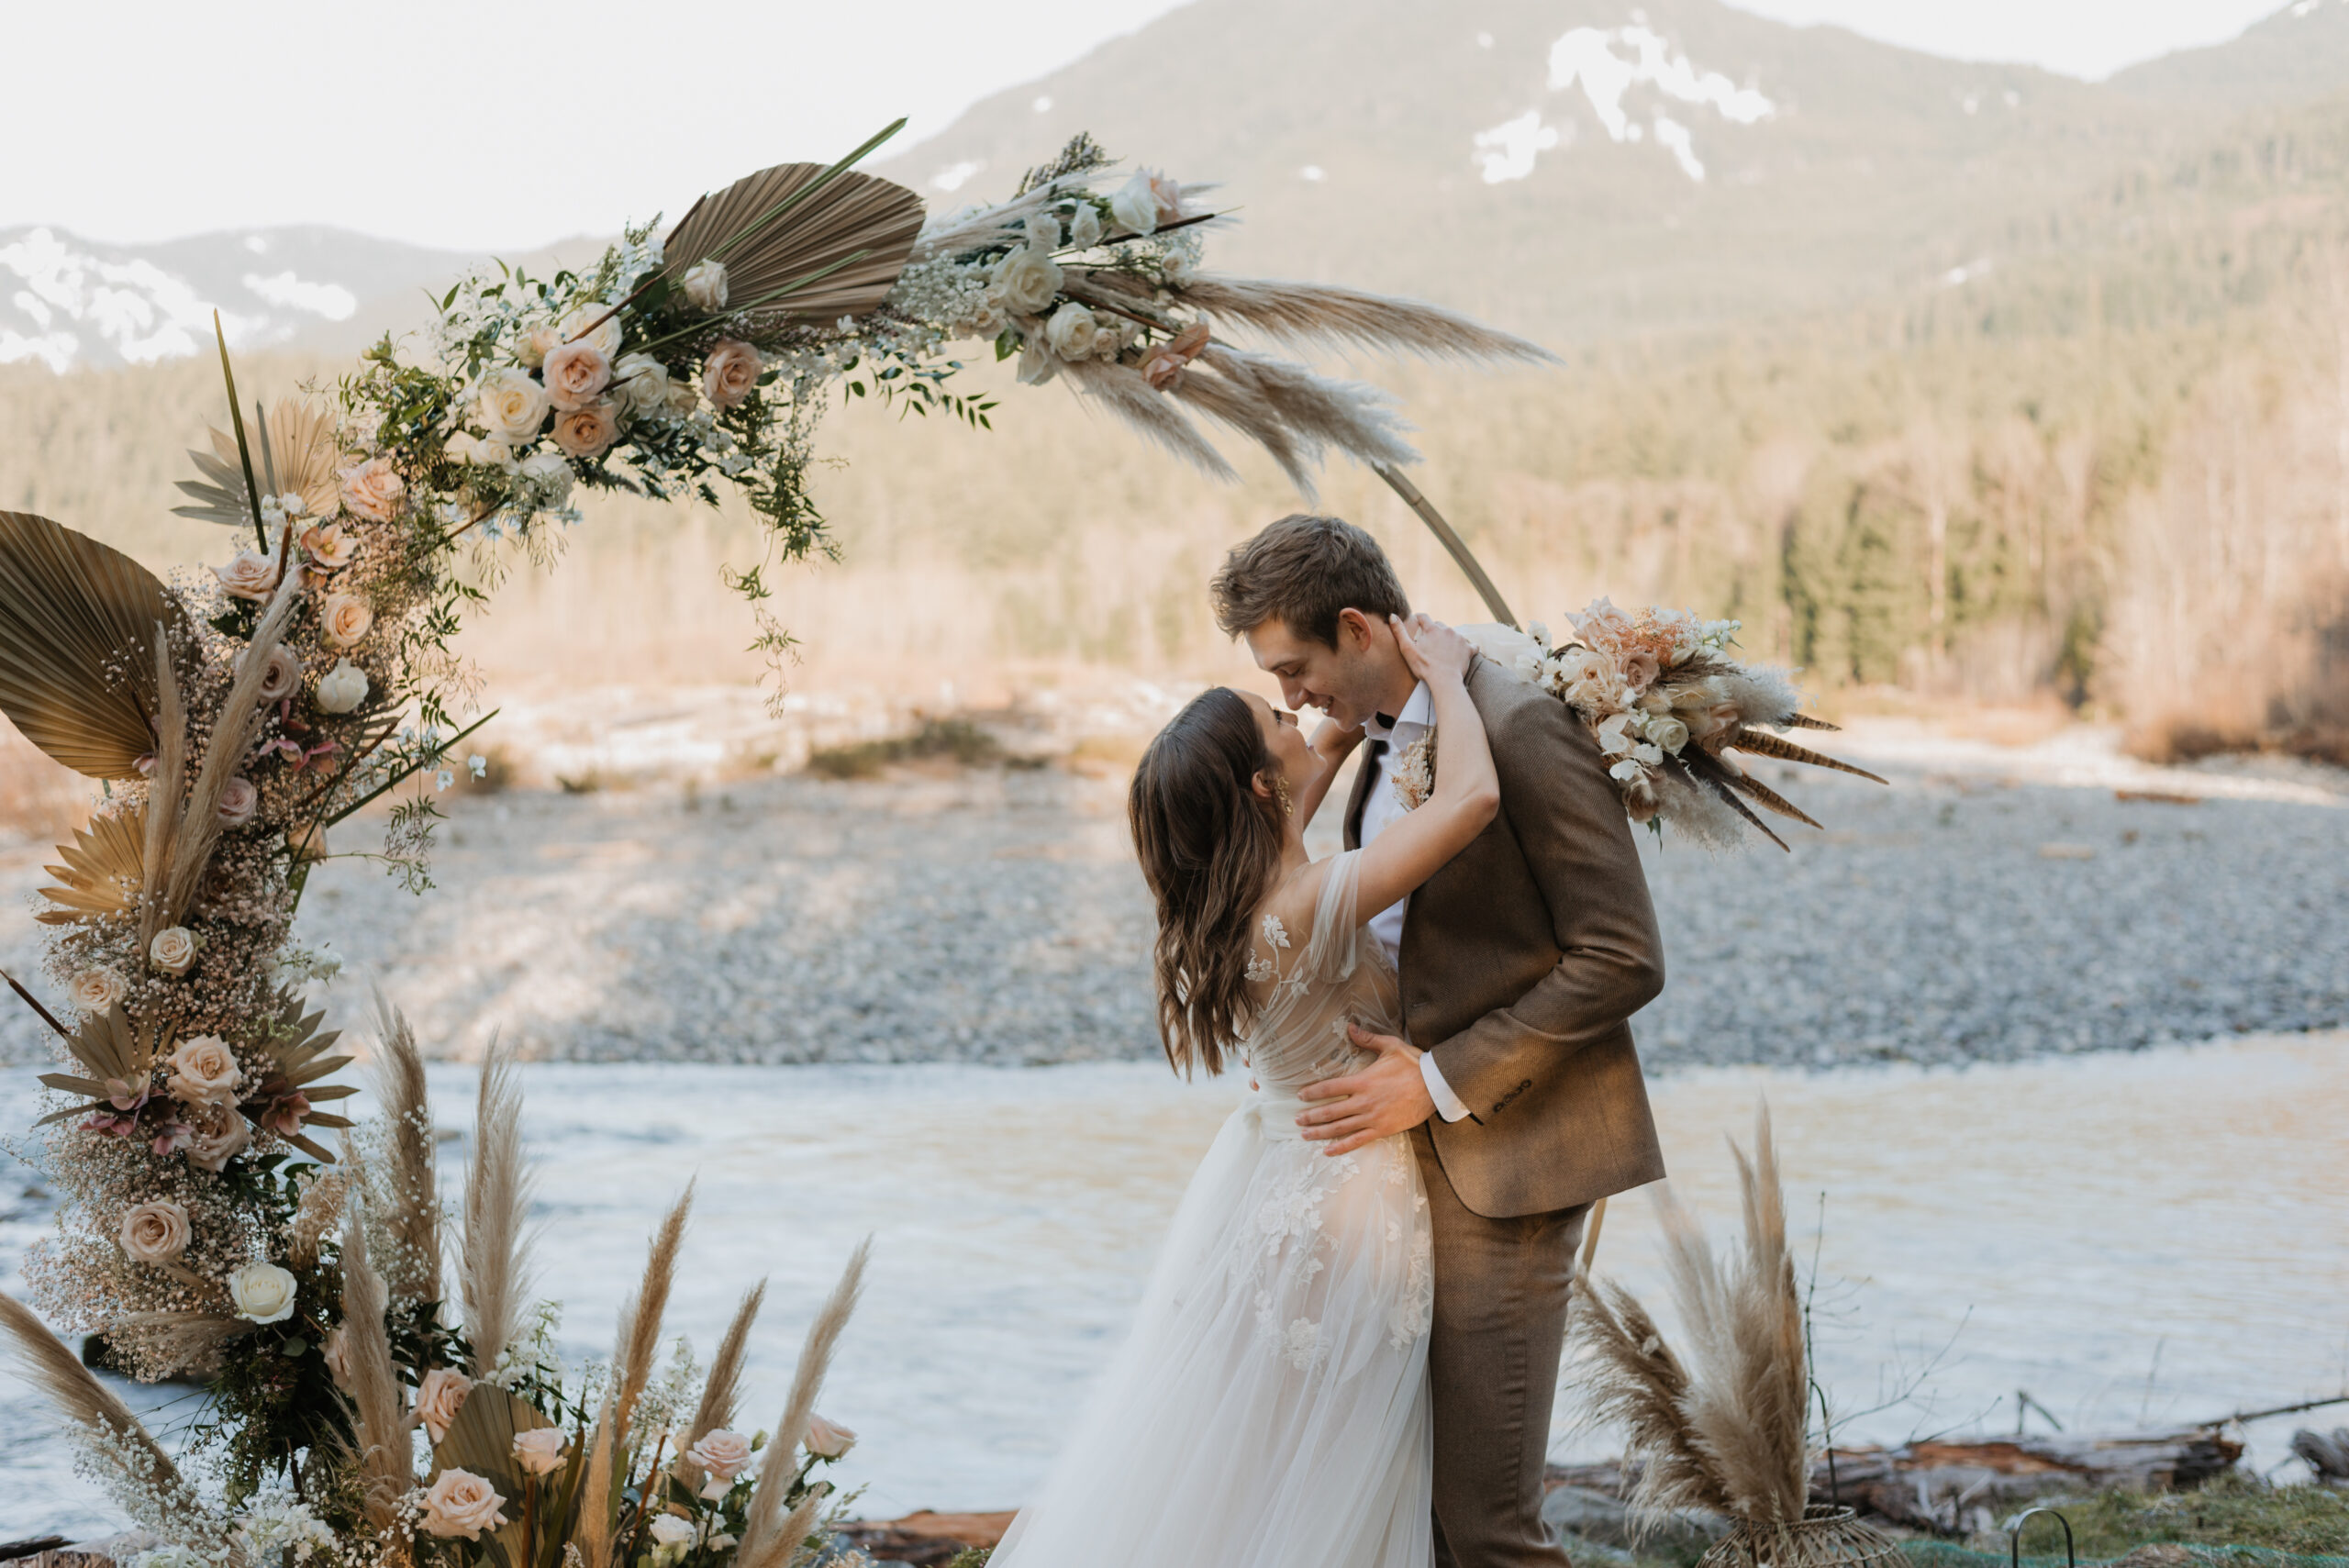 A couple eloping in Washington State. They are wearing wedding attire and standing in front of a river and mountain view. There is a boho floral arch behind them. They are embracing each other and going in for a kiss.